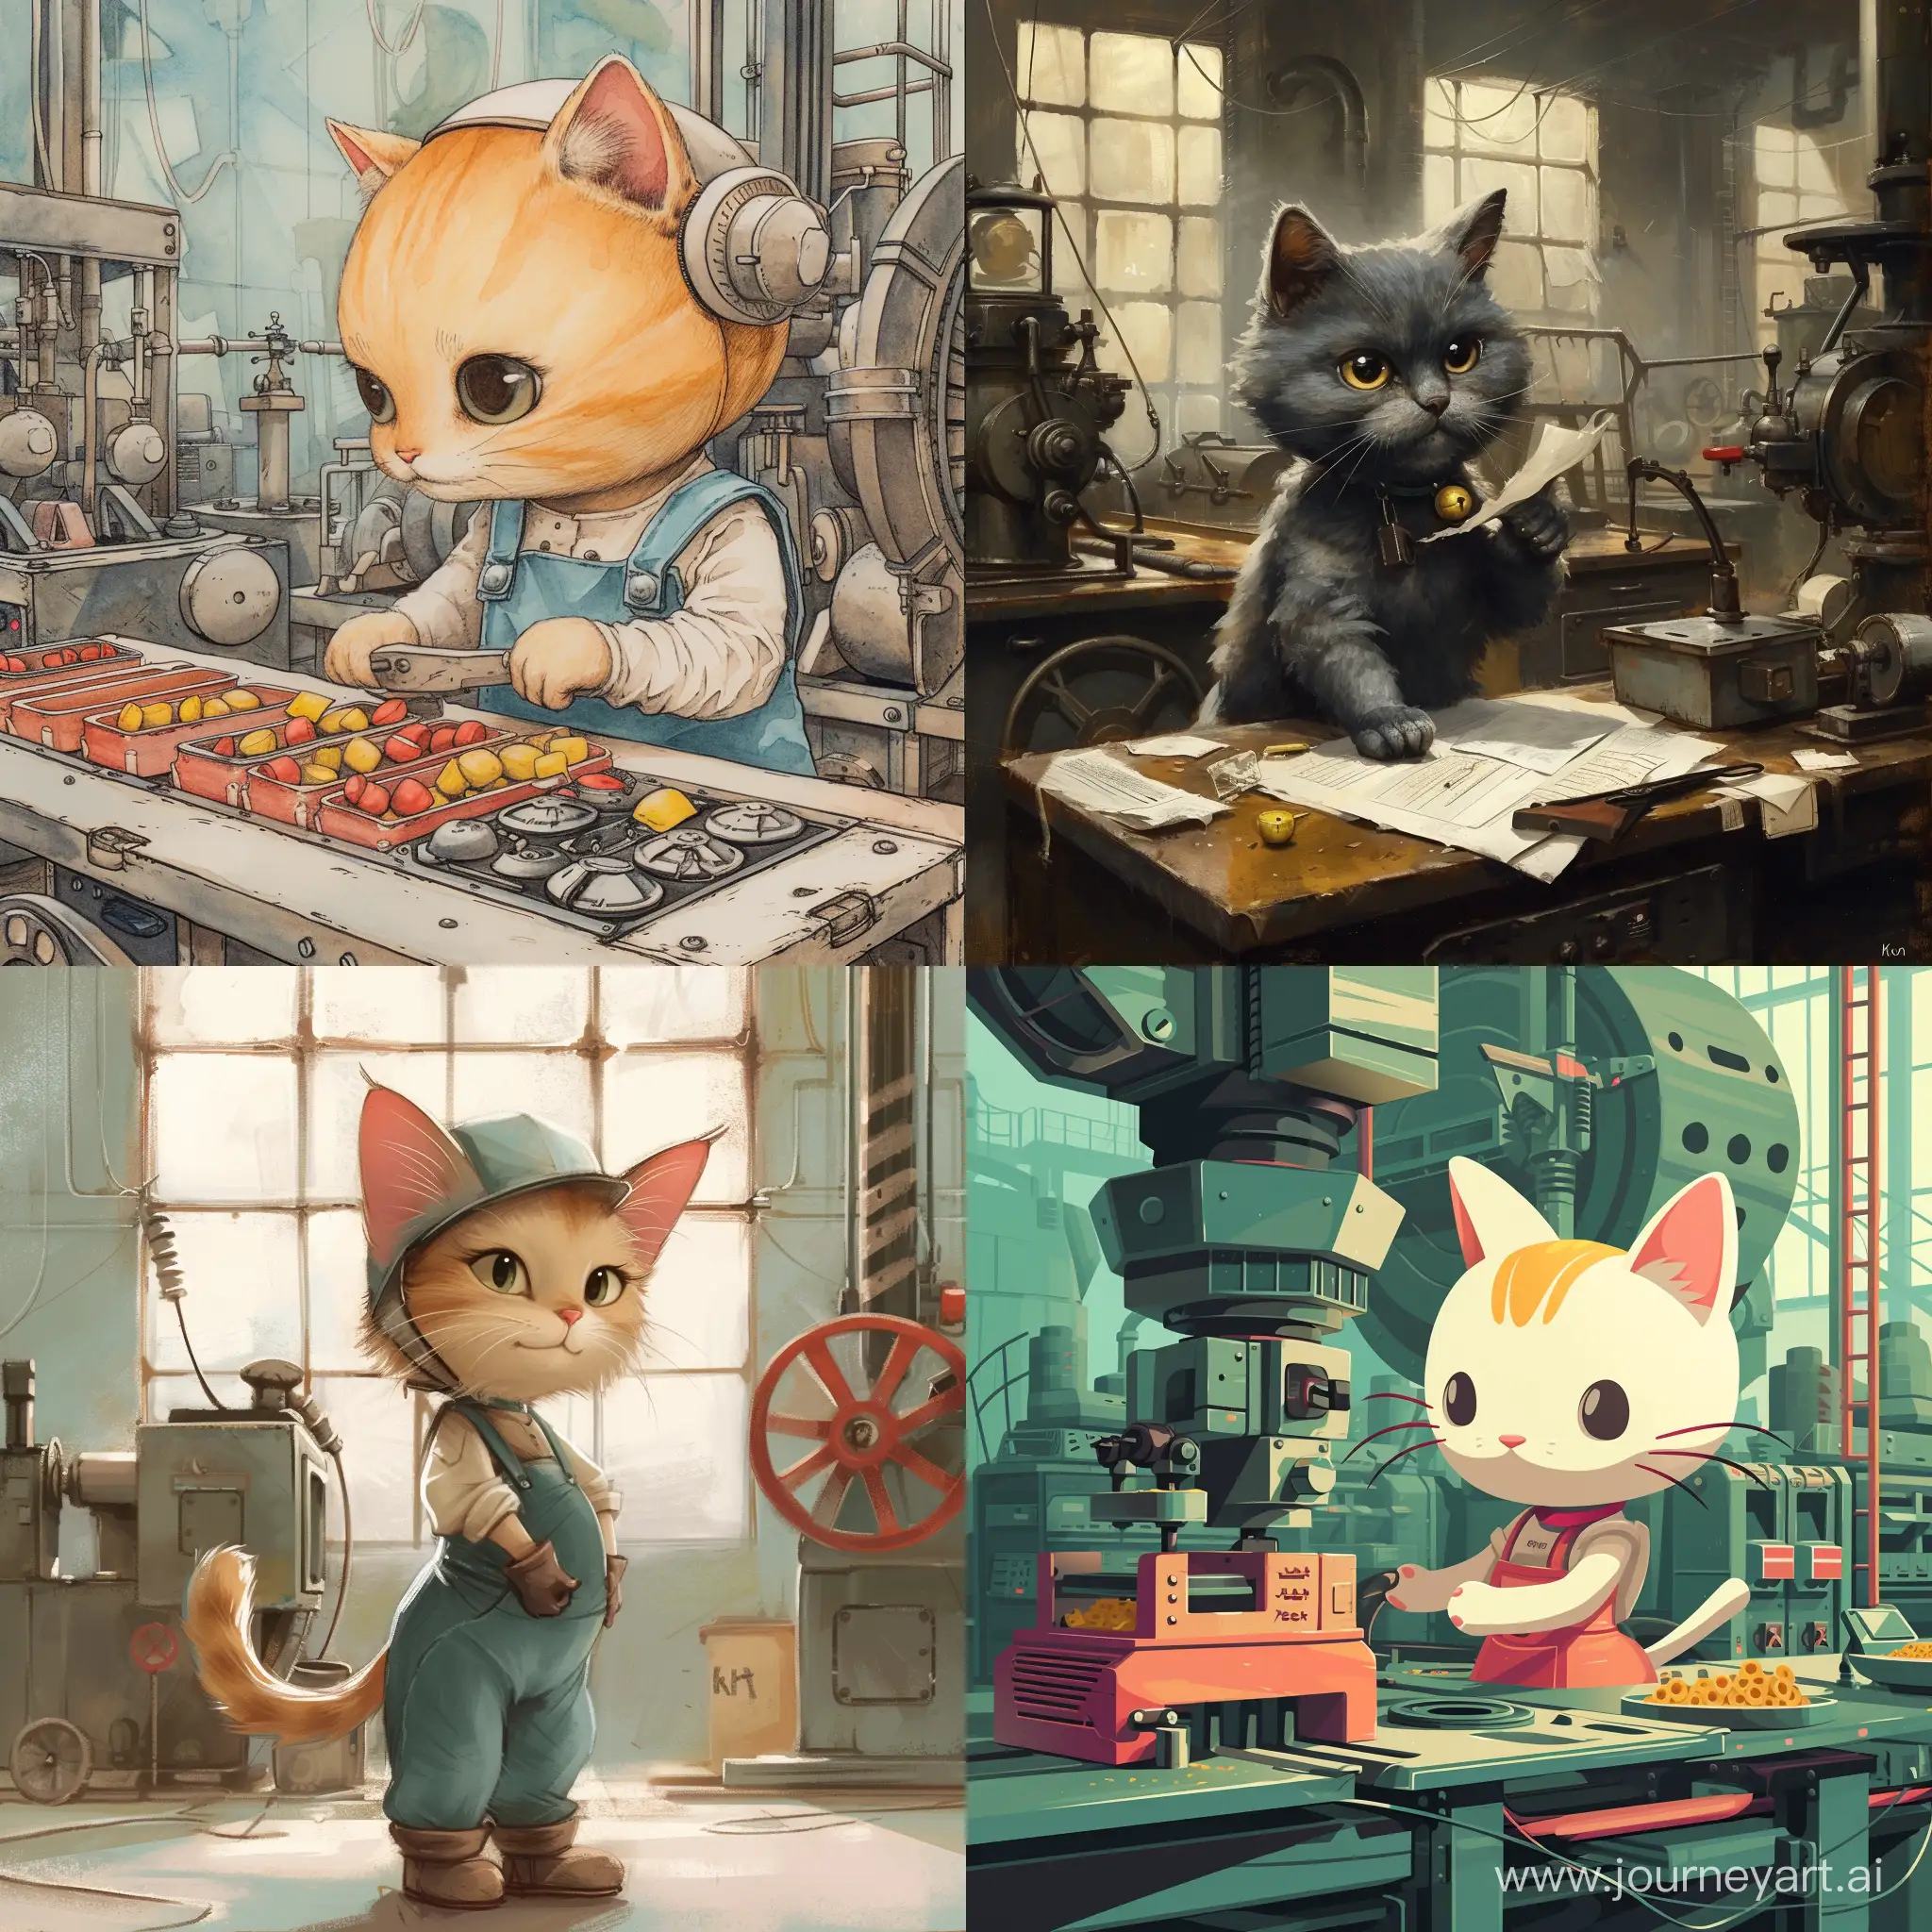 Kitty works at the factory